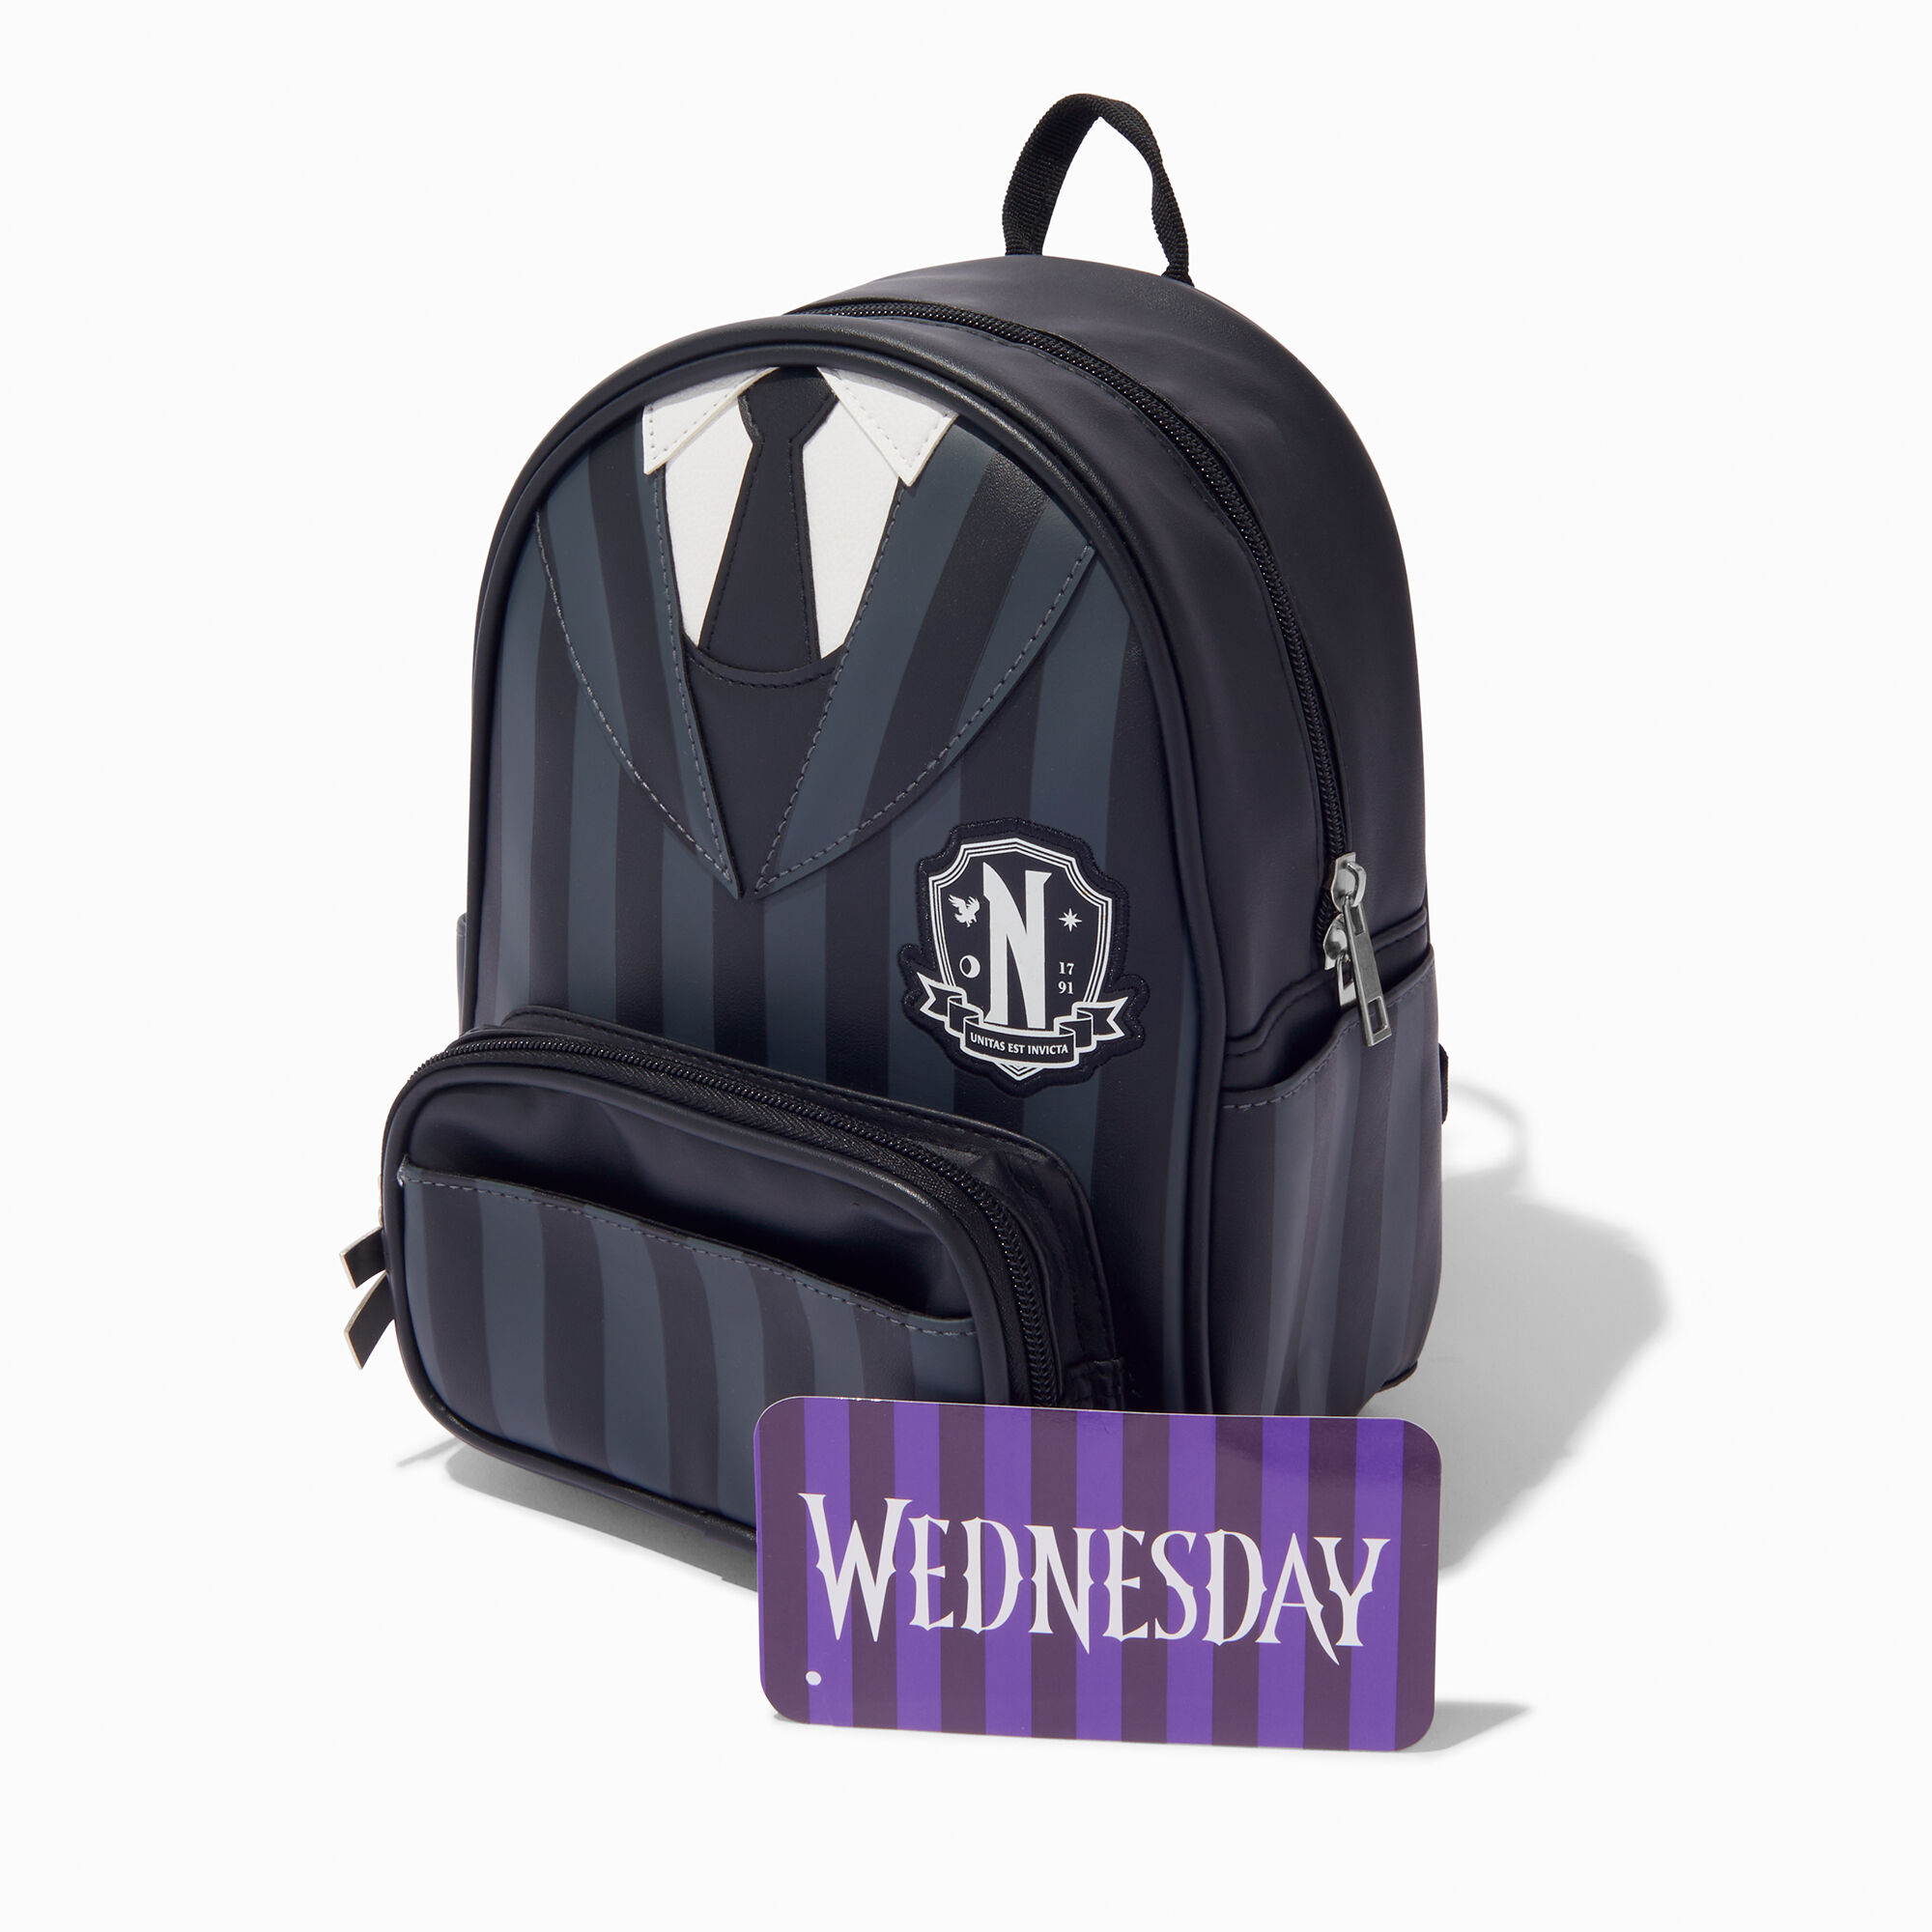 View Claires Wednesday Uniform Mini Backpack information